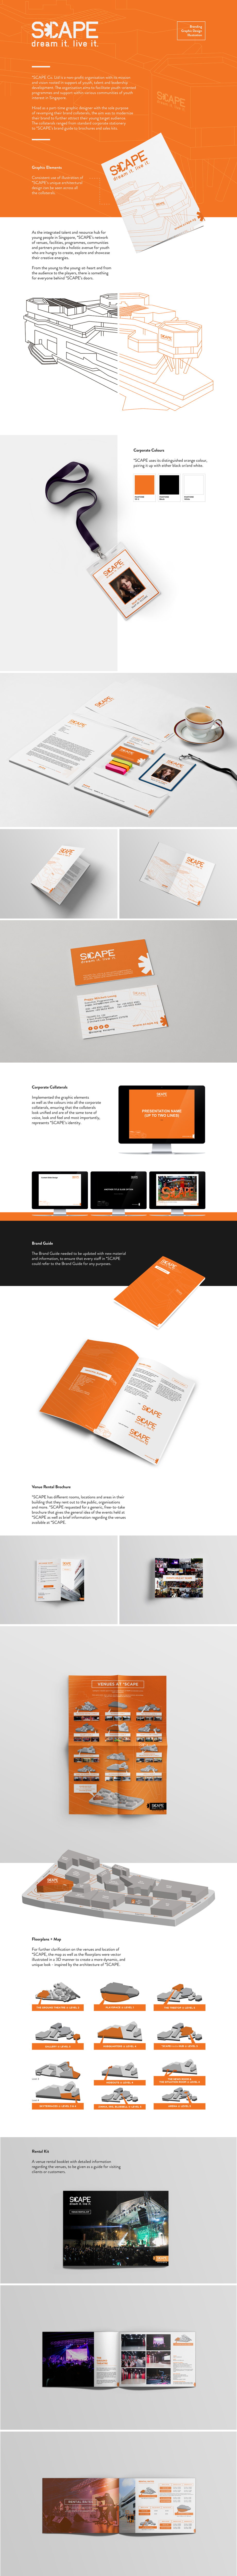 *scape singapore youth somerset revamp venue rental collaterals brochure vector